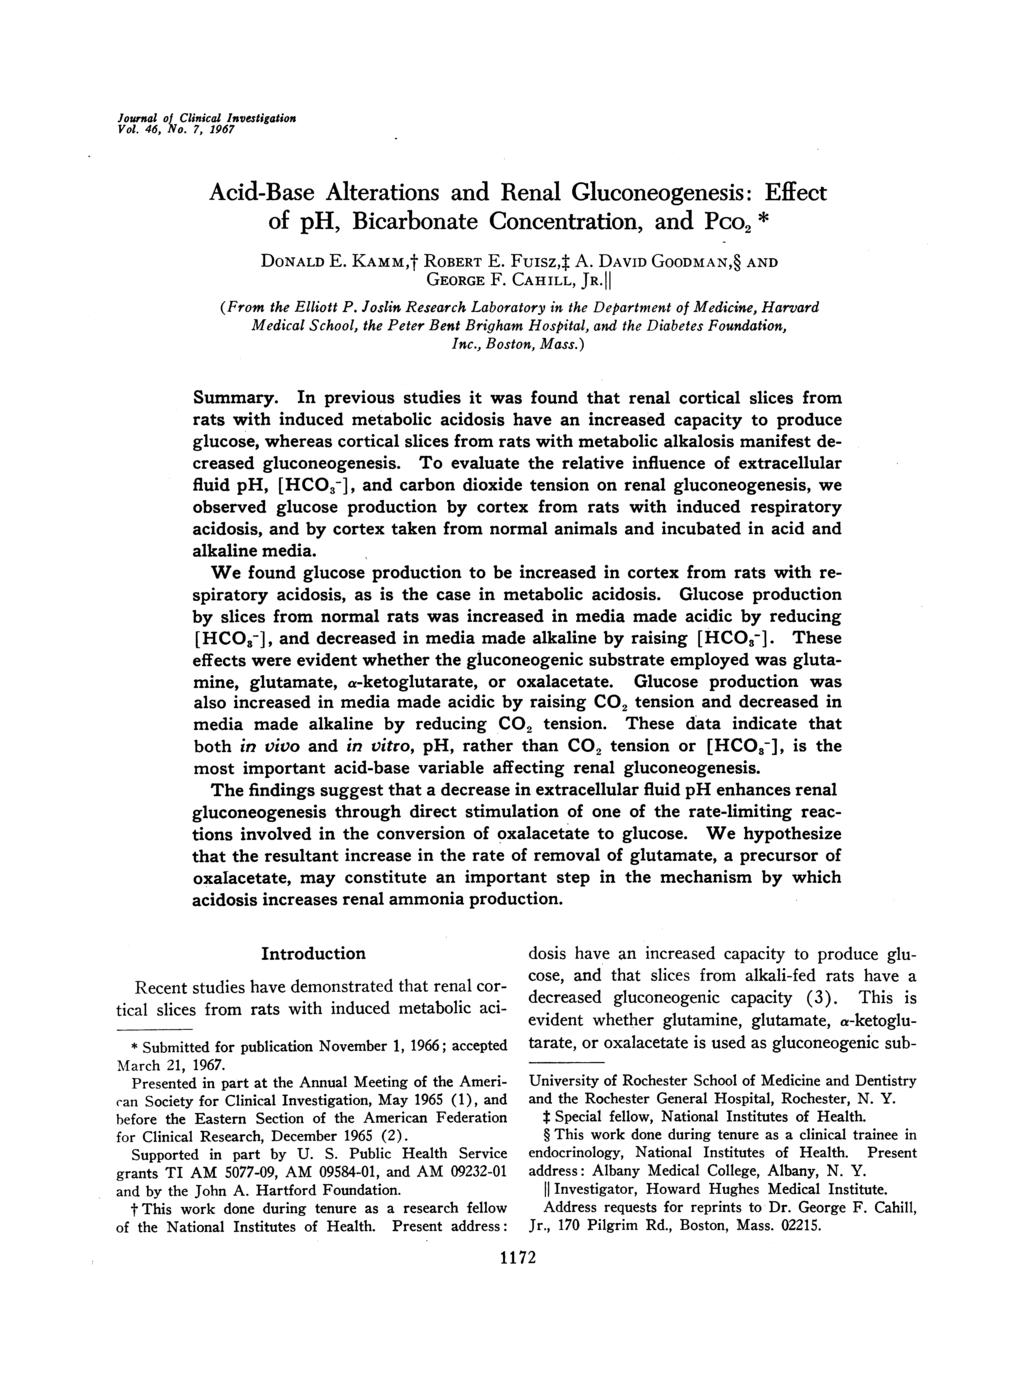 Journal of Clinical Investigation Vol. 46, No. 7, 1967 Acid-Base Alterations and Renal Gluconeogenesis: Effect of ph, Bicarbonate Concentration, and Pco2 * DONALD E. KAMM,t ROBERT E. Fuisz,4 A.